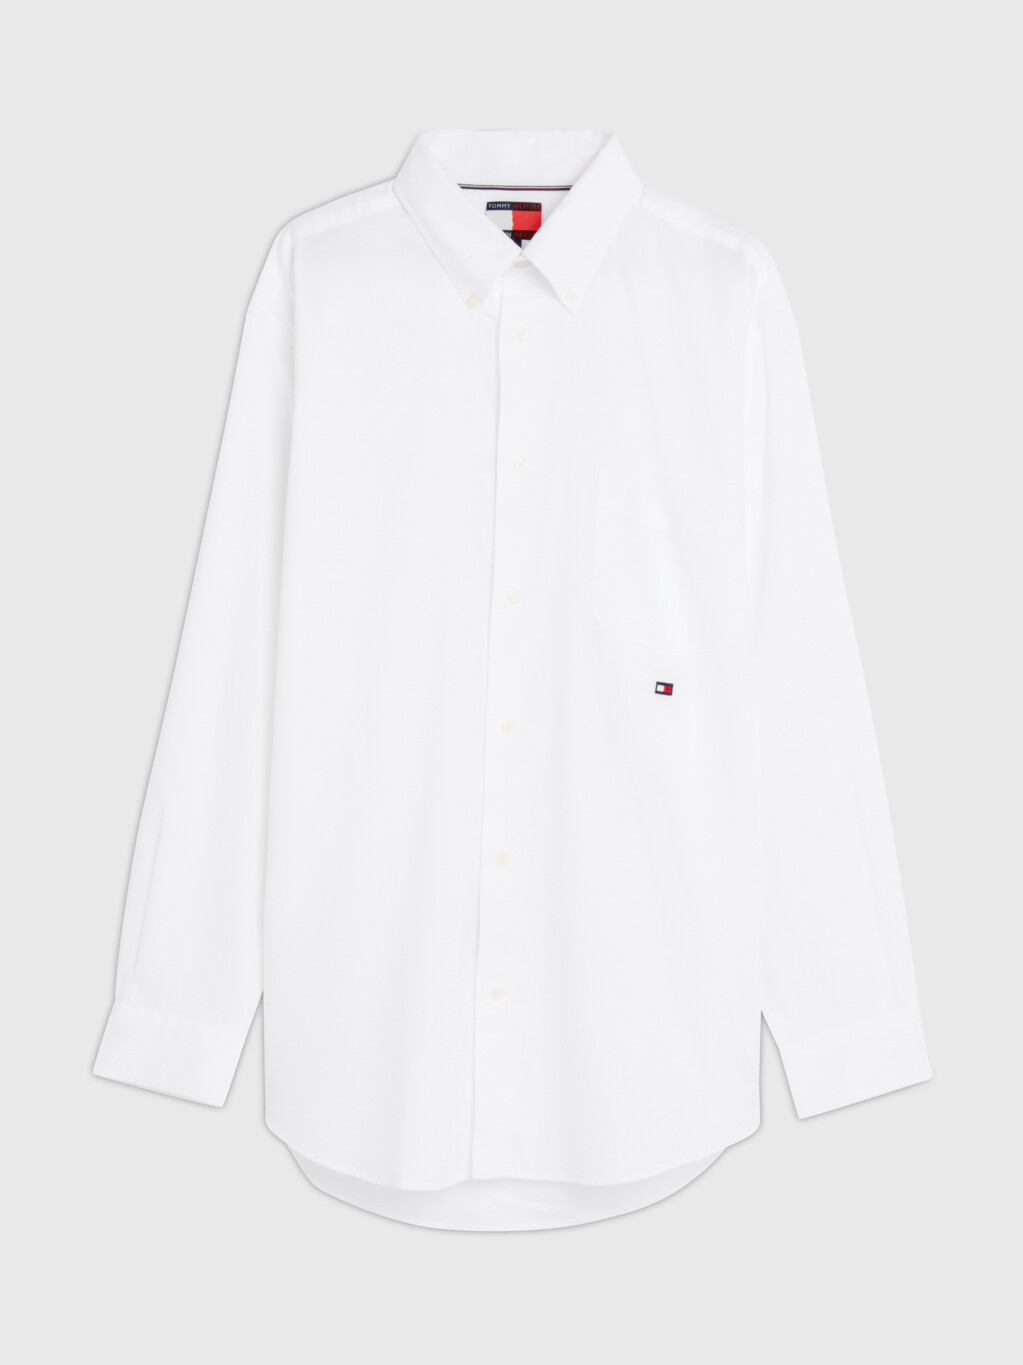 Tommy Hilfiger X Shawn Mendes Archive Fit Oxford Shirt, Optic White, hi-res